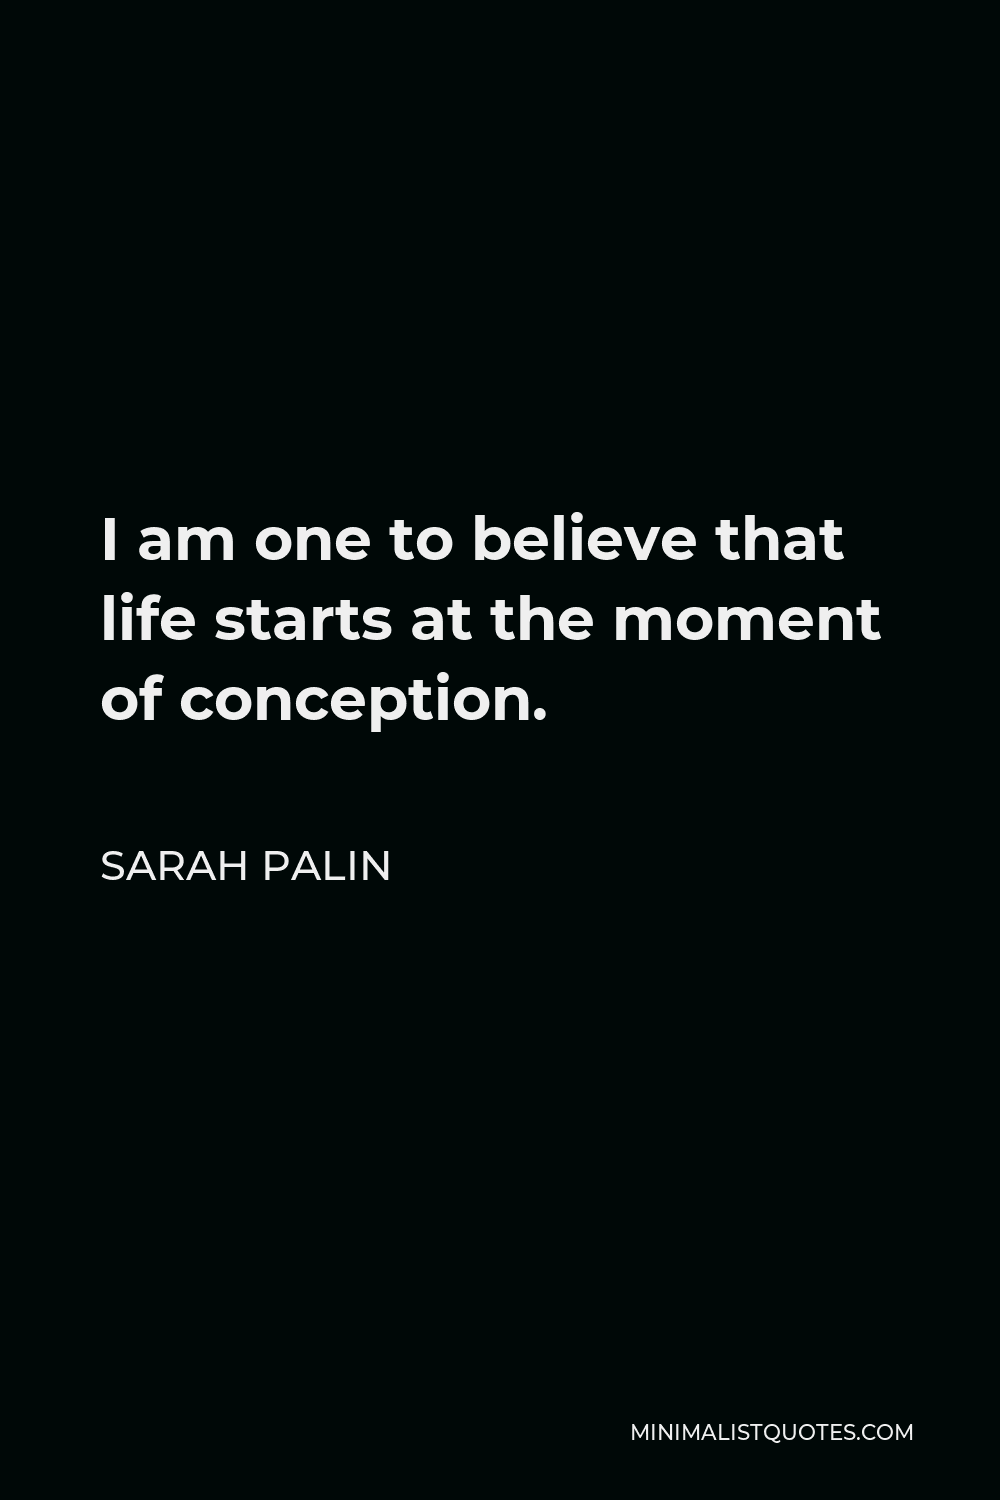 Sarah Palin Quote - I am one to believe that life starts at the moment of conception.